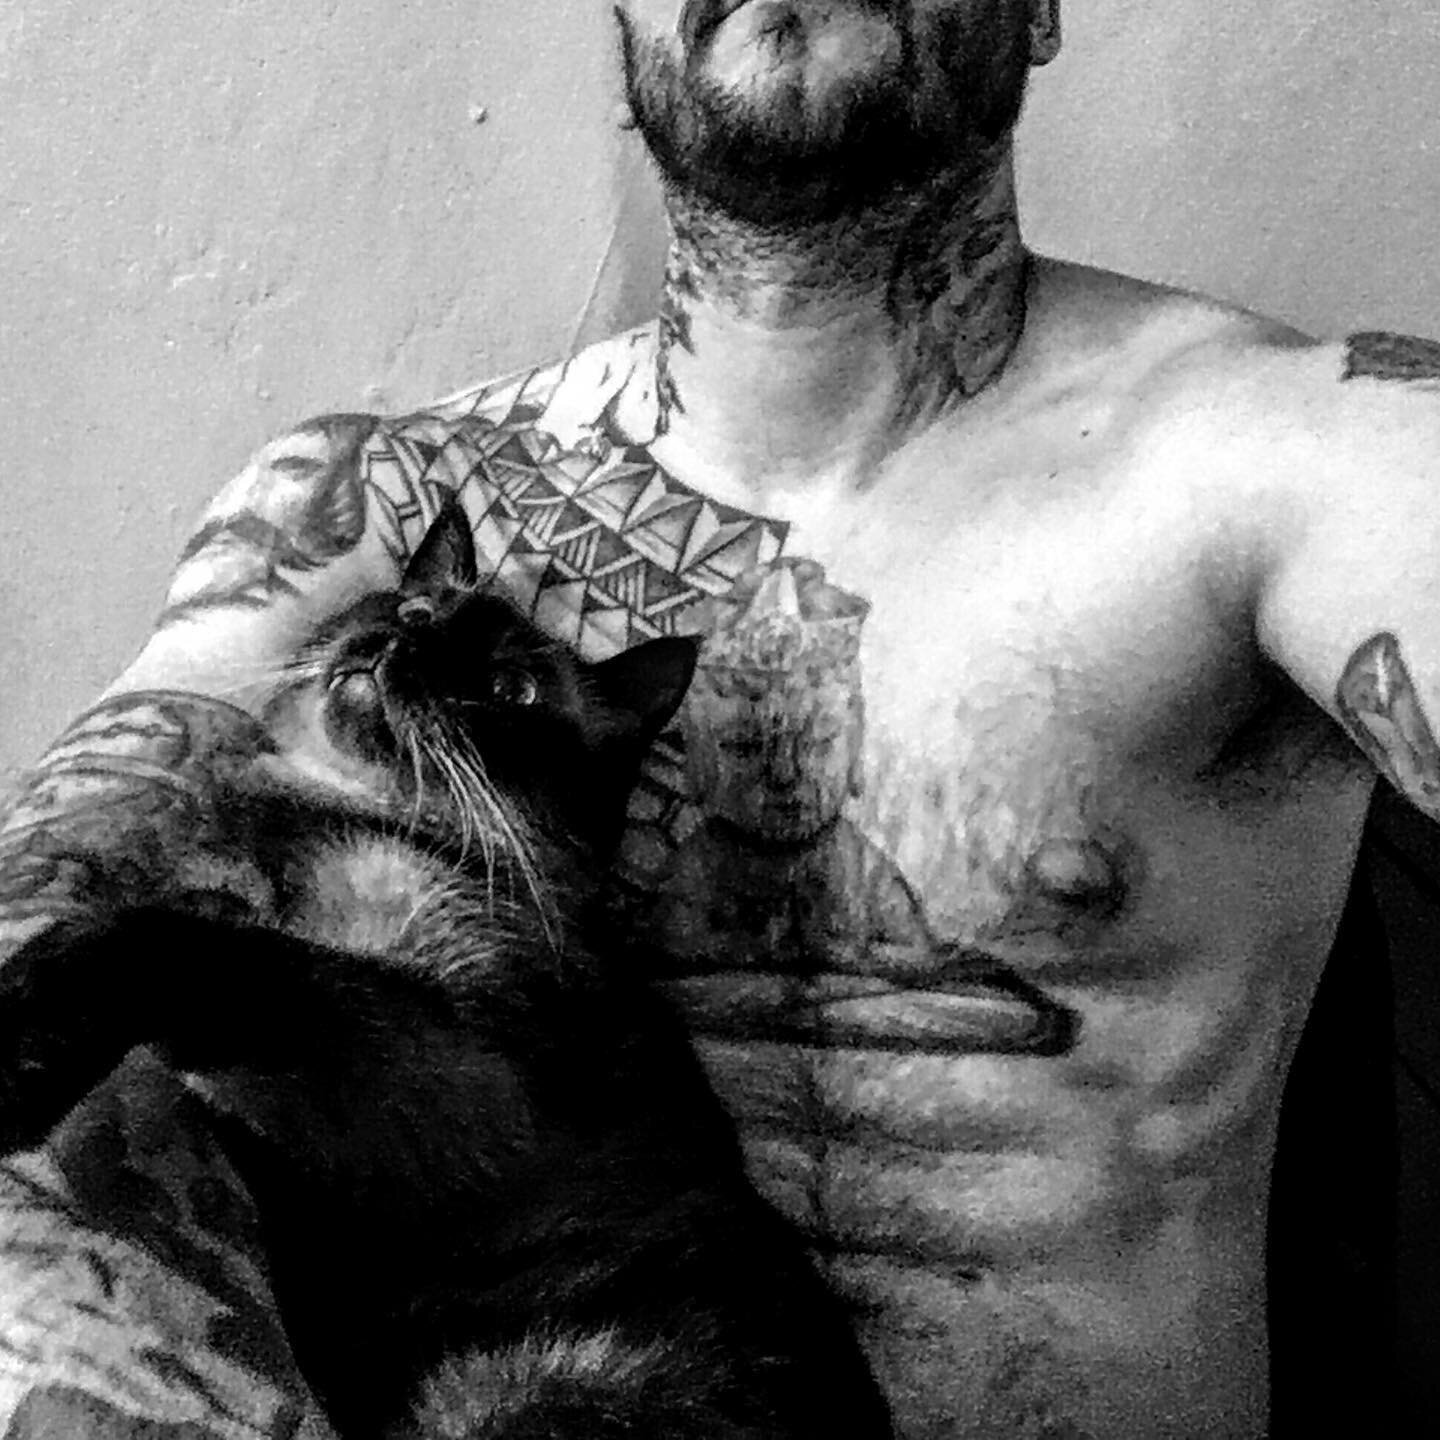 When you just want to draw and the cat wants to play lol  #Tattoo #tattoos #darkart #blackandwhite #artist #art #inkjecta #fusionink #instadaily #instagood #design #inkmaster #ink #inked  #instatattoo #sanfrancisco #sanjose #campbell #bayarea #califo